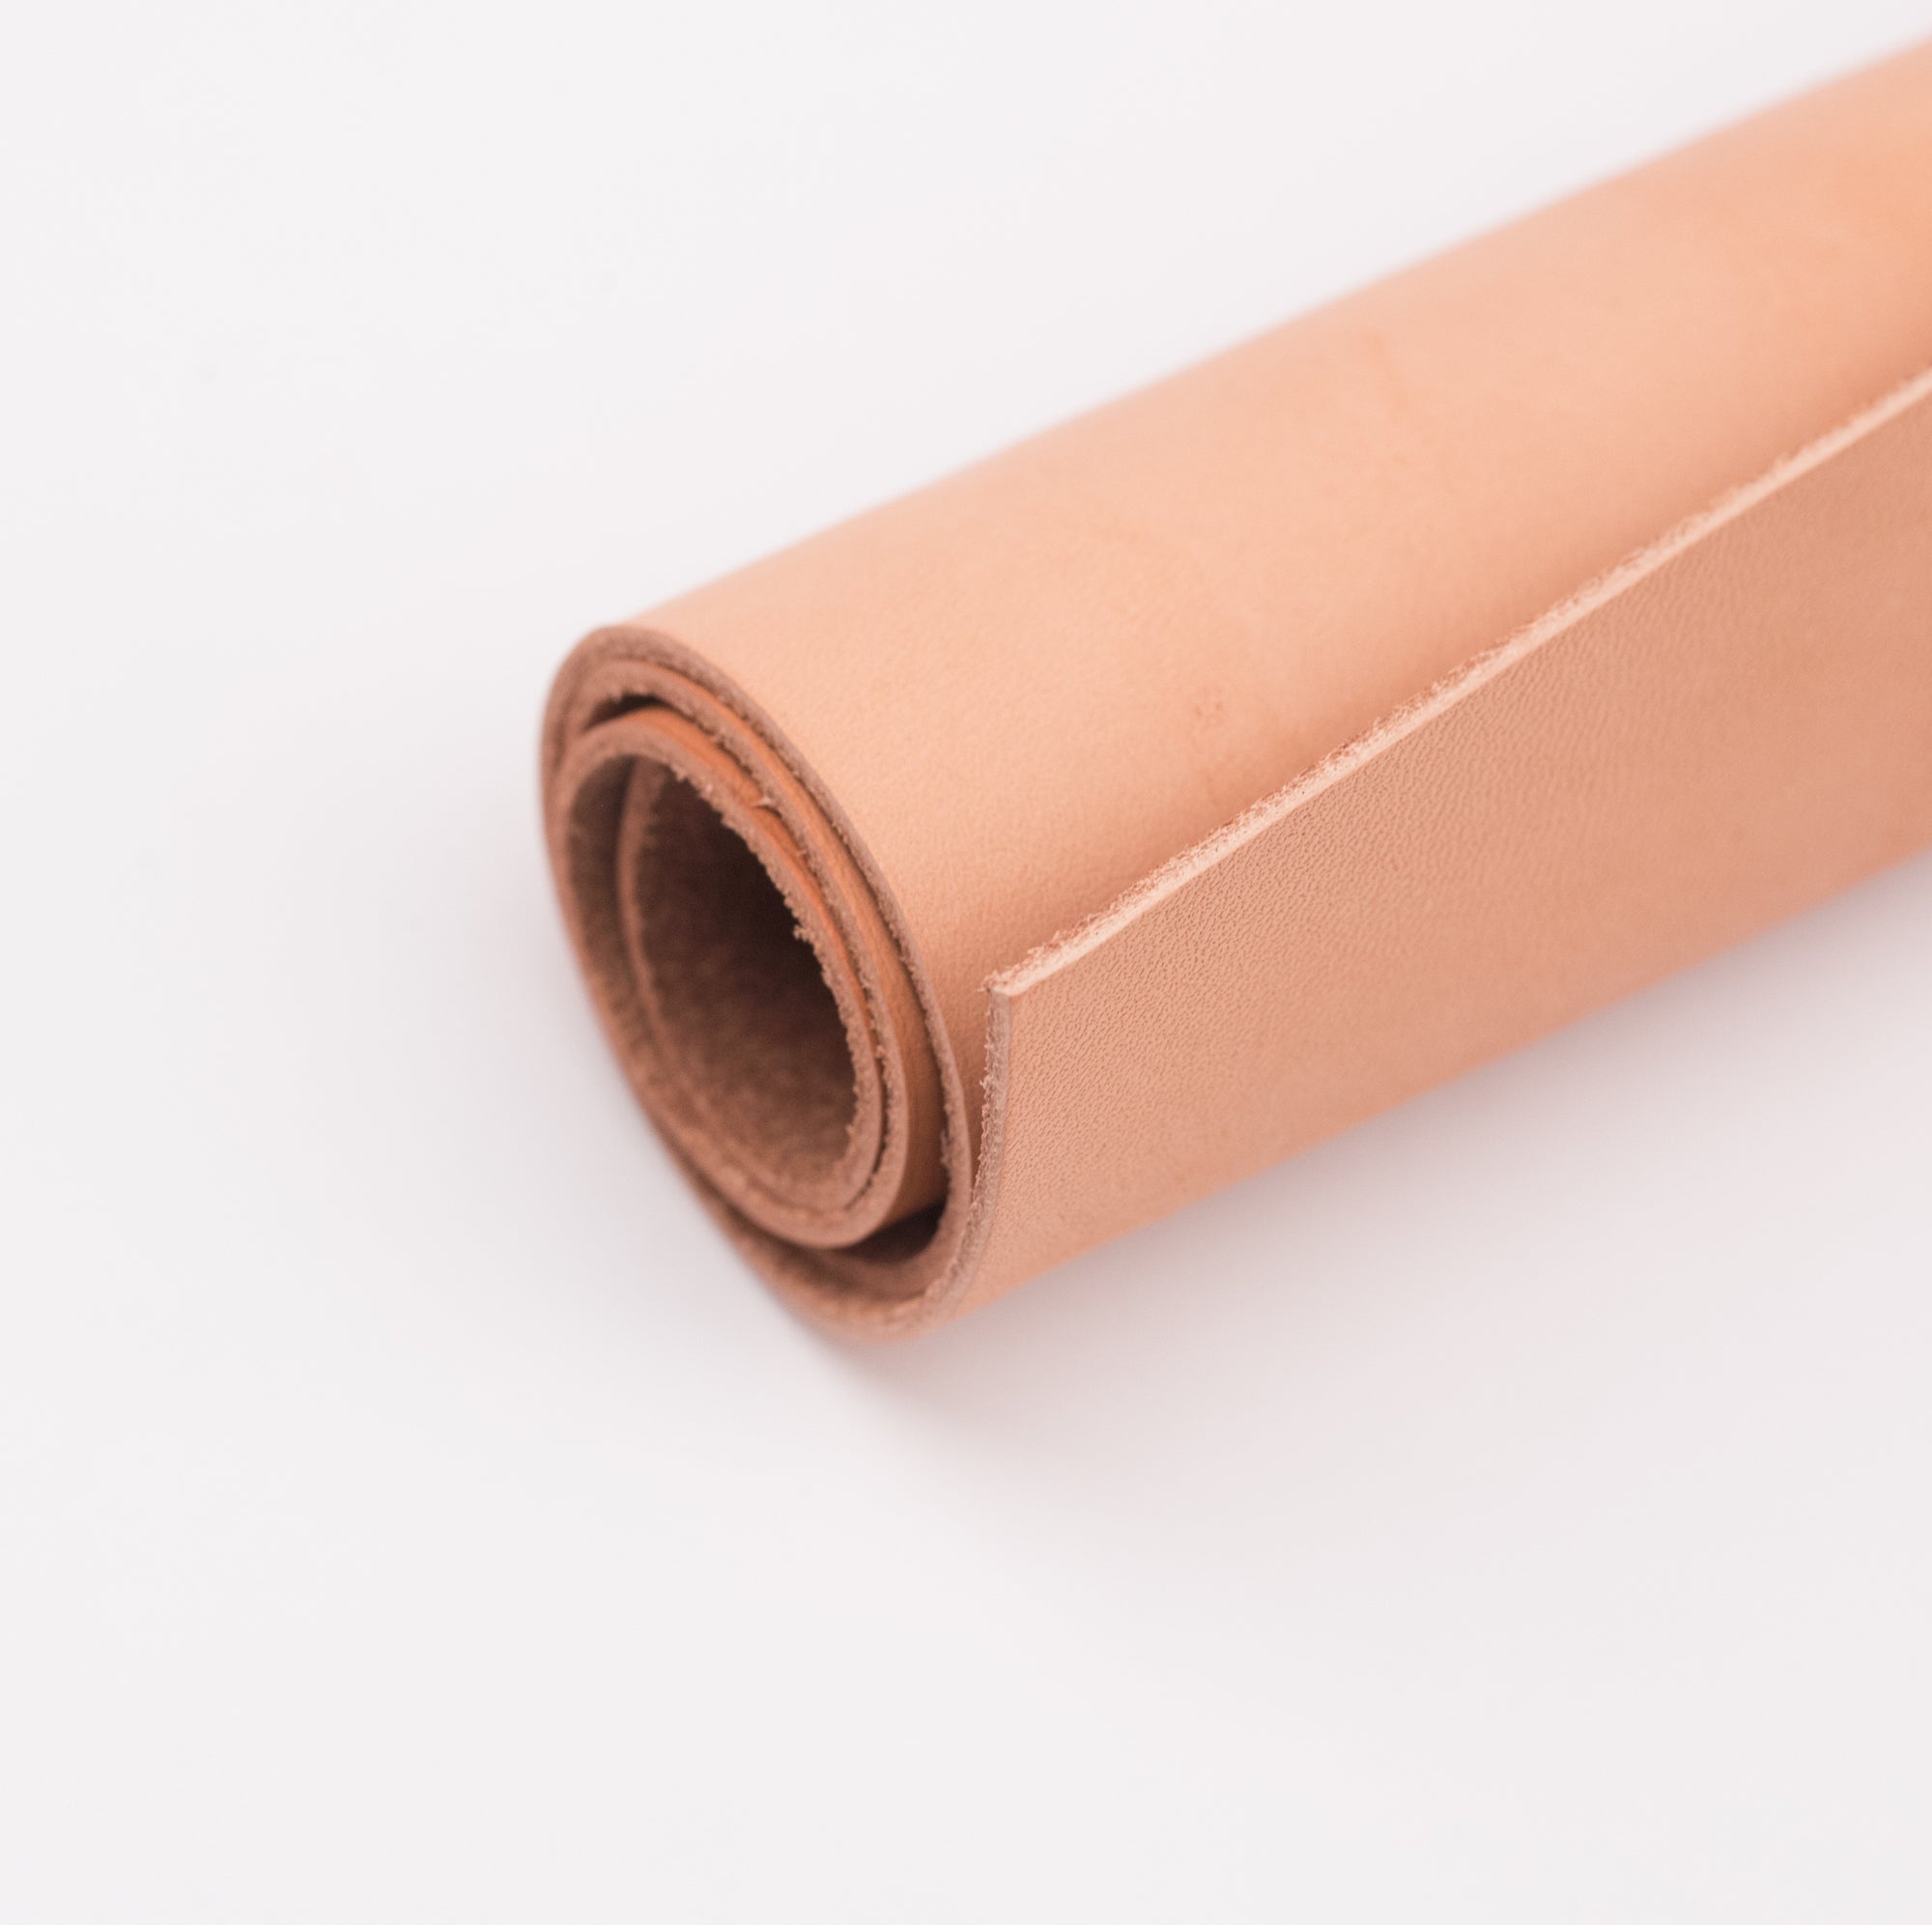 A roll of natural leather on a white background